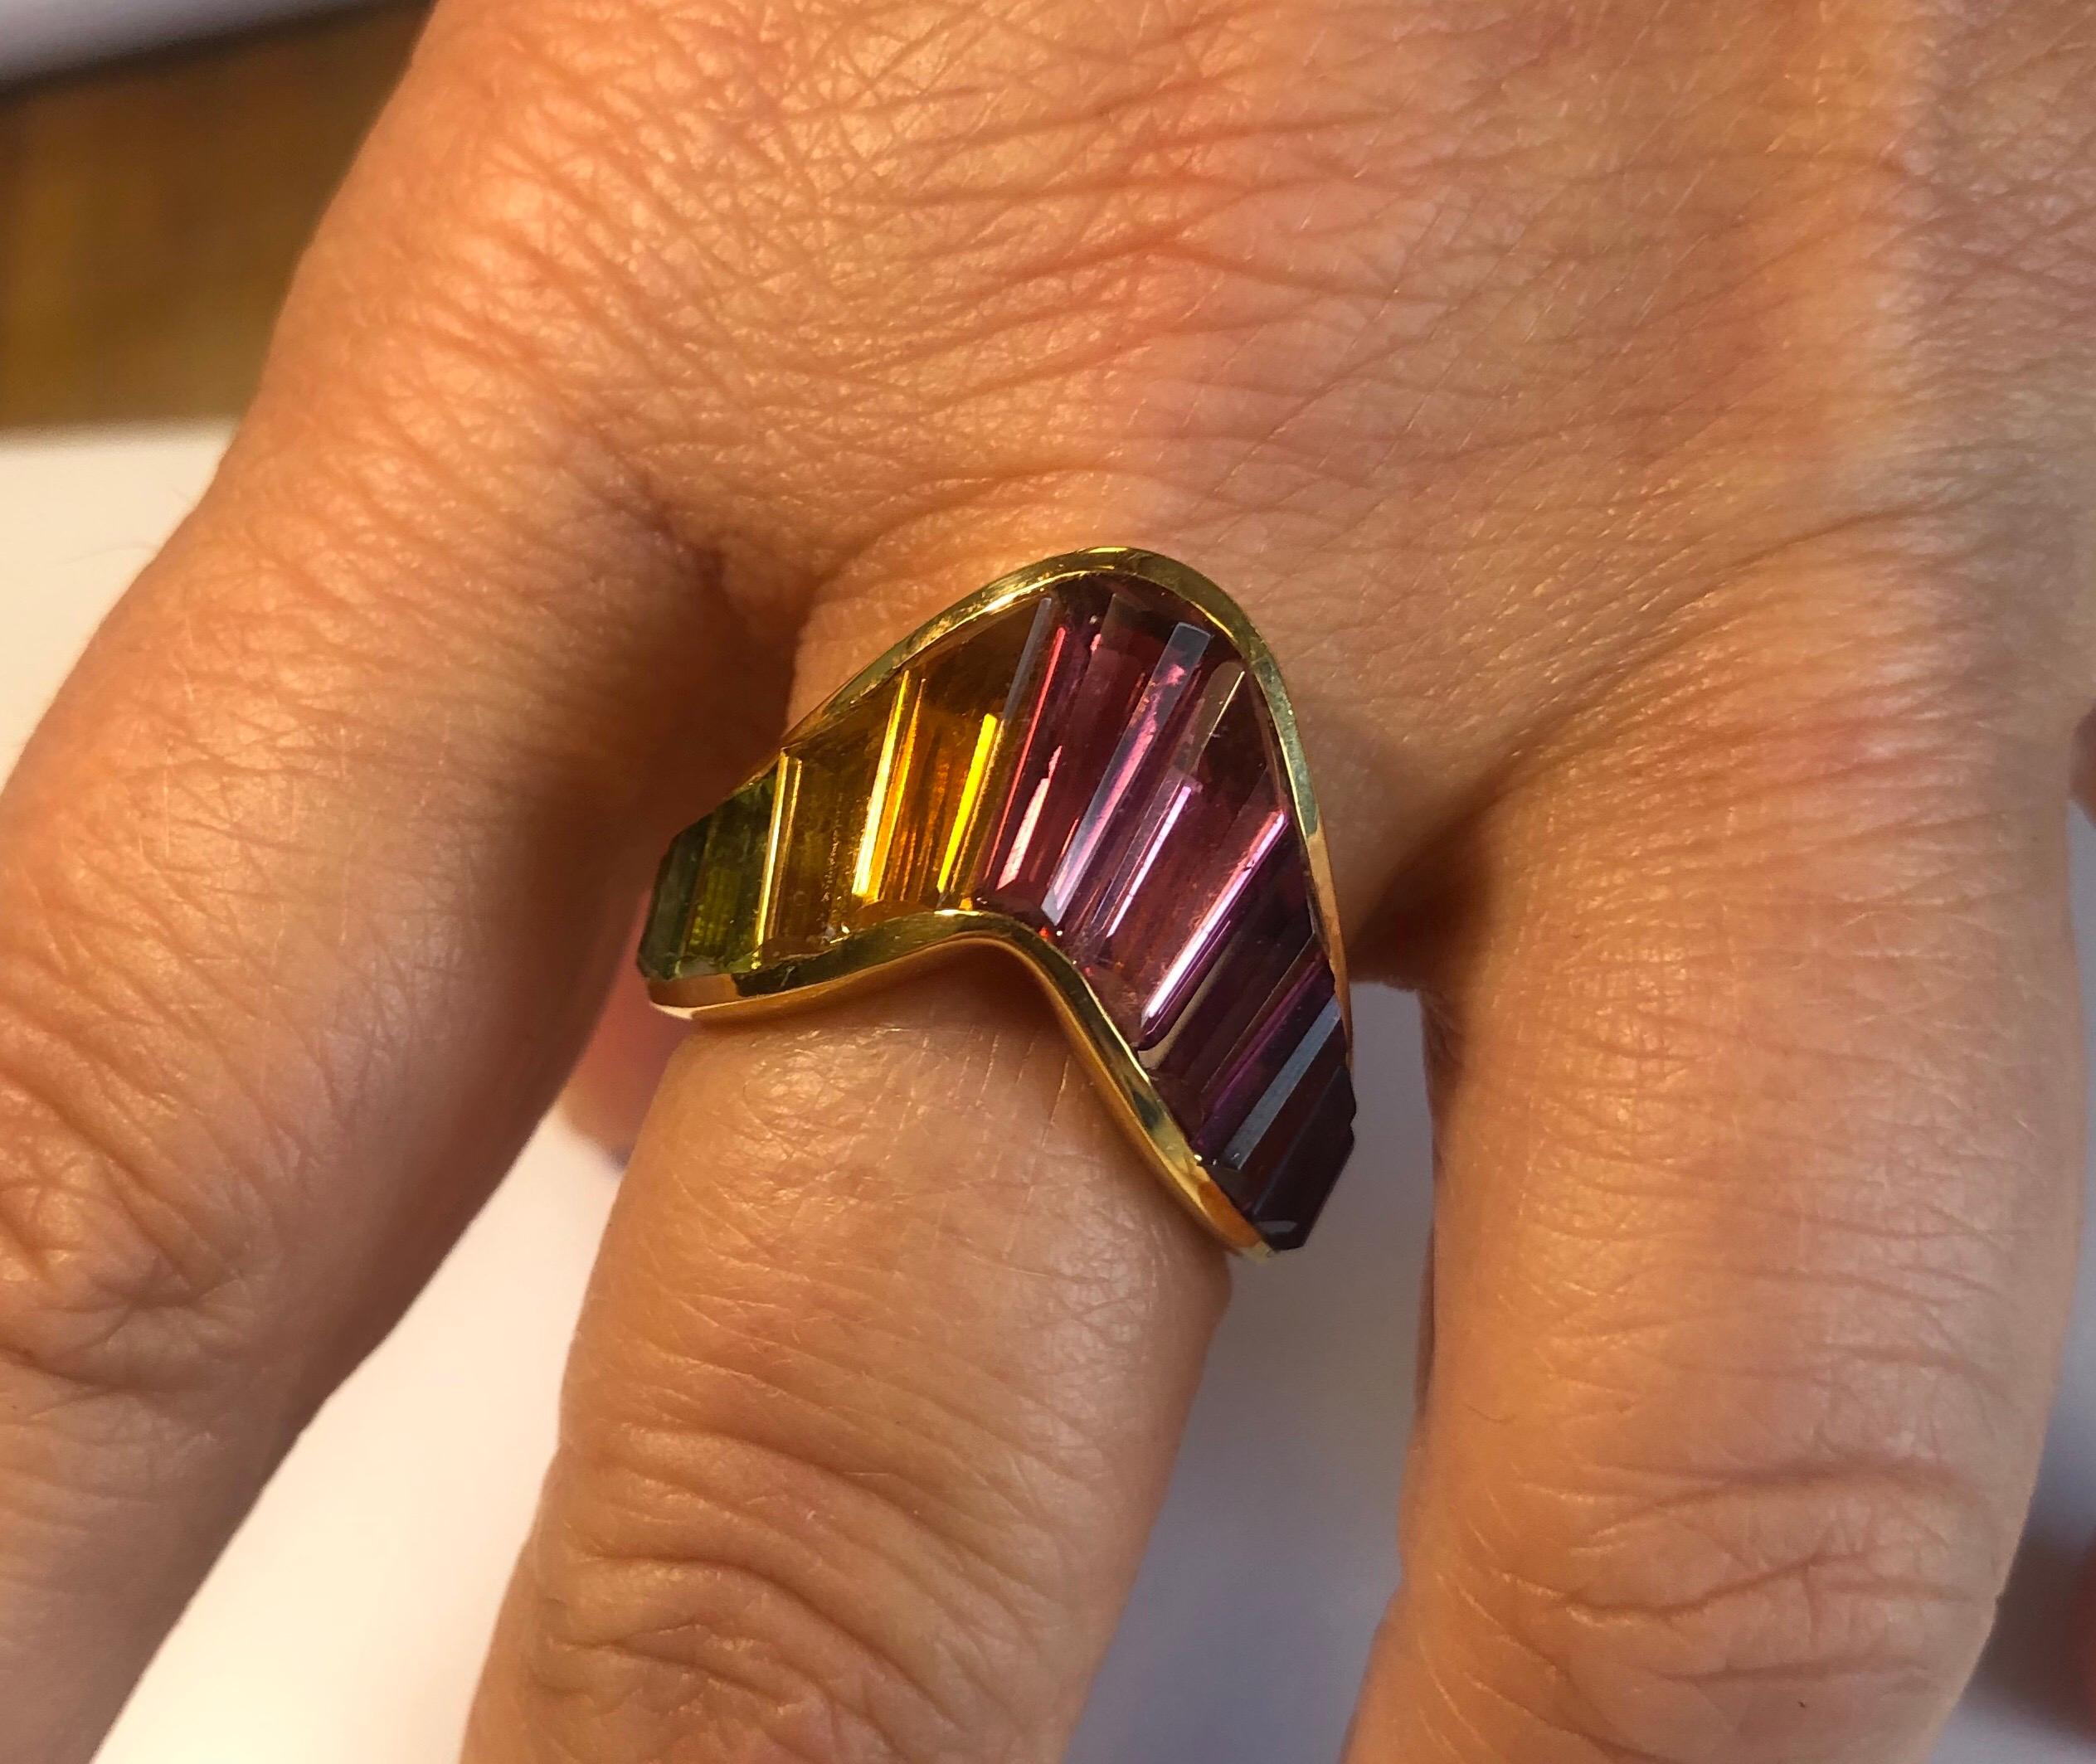 18K yellow gold Rainbow ring channel set with 11 specially cut faceted baguette shapes: pink and green tourmaline, amethyst, blue topaz, periodot and citrine.
Finger size 7, may be sized smaller or larger.
Last retail $5500